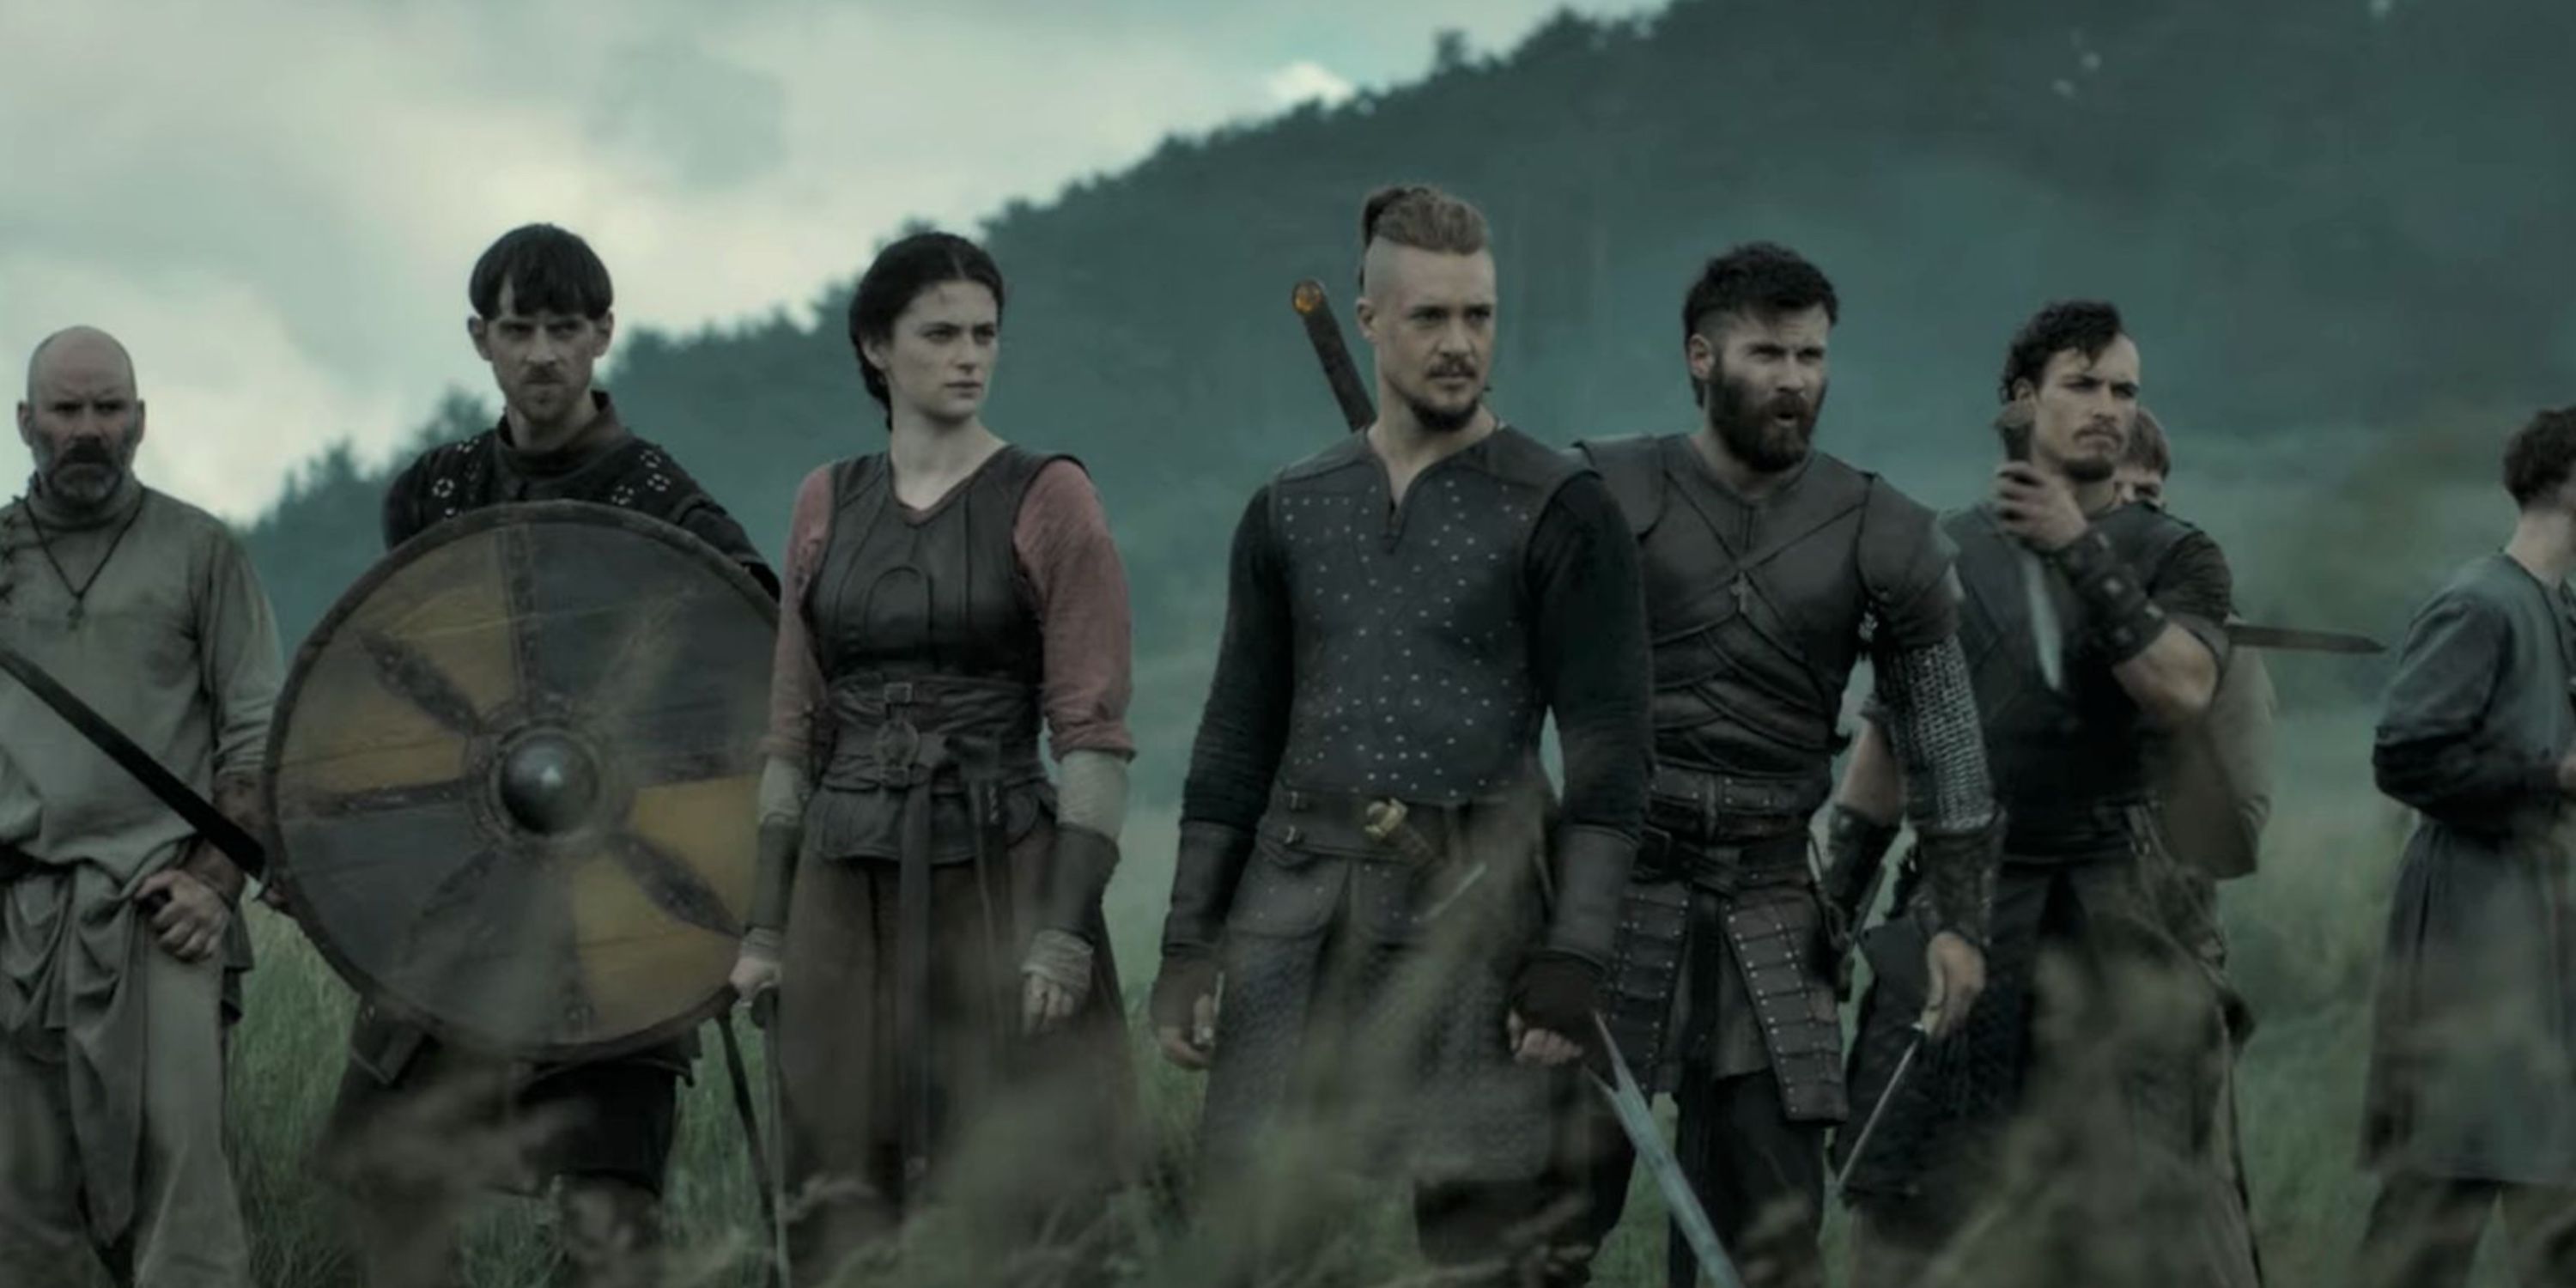 Uhtred standing with Finan and Aethelflaed in The Last Kingdom.